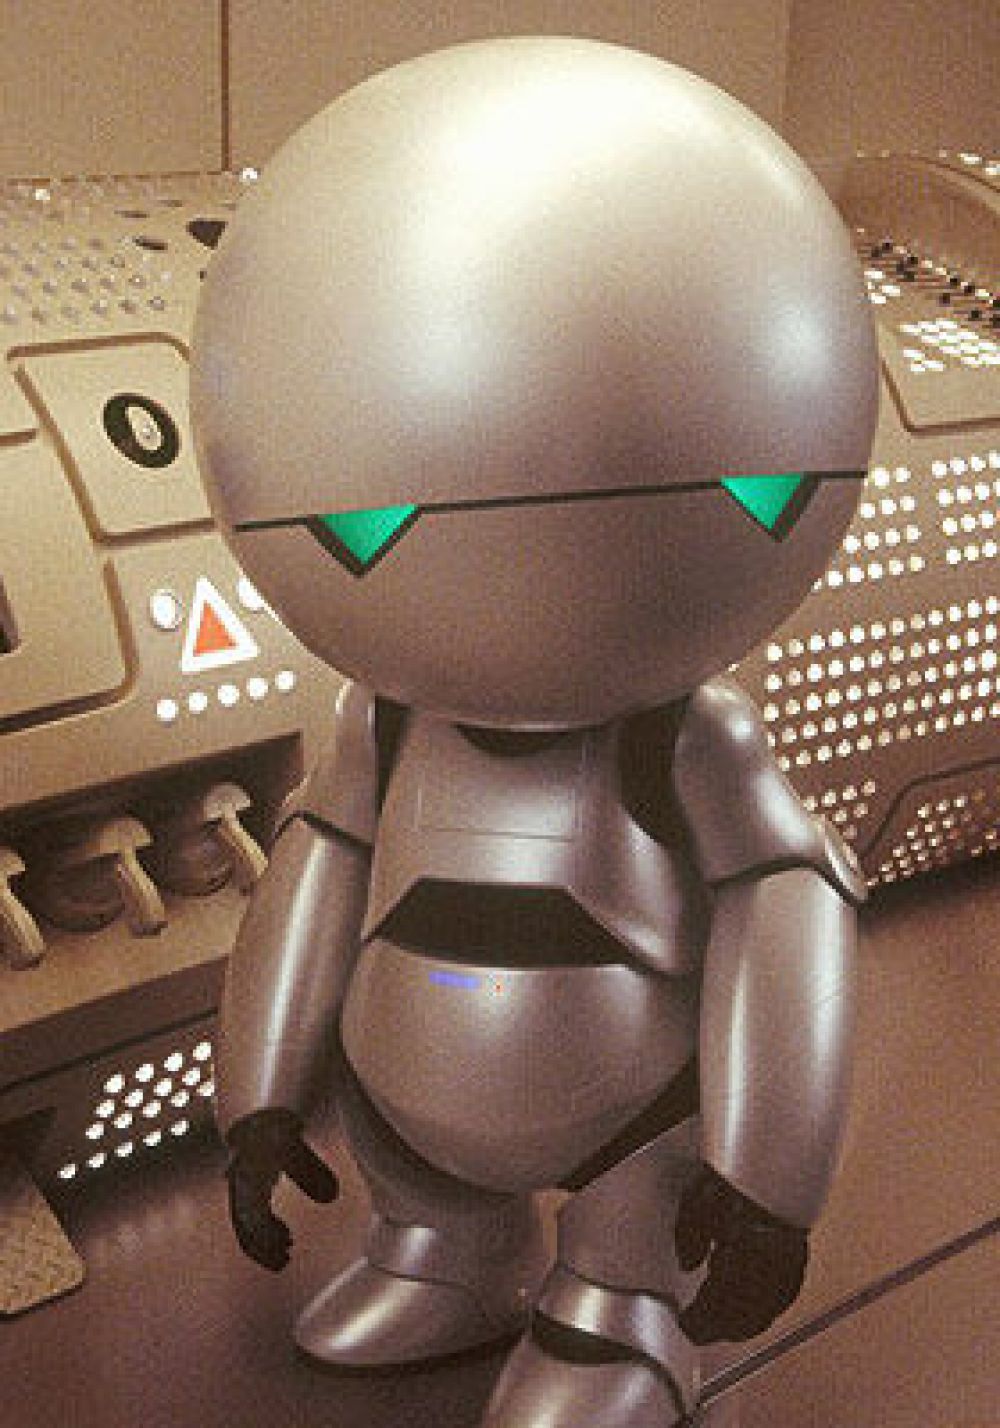 Wendy's Vanilla Frosty: A delightfully frosty character - Marvin The Paranoid Android